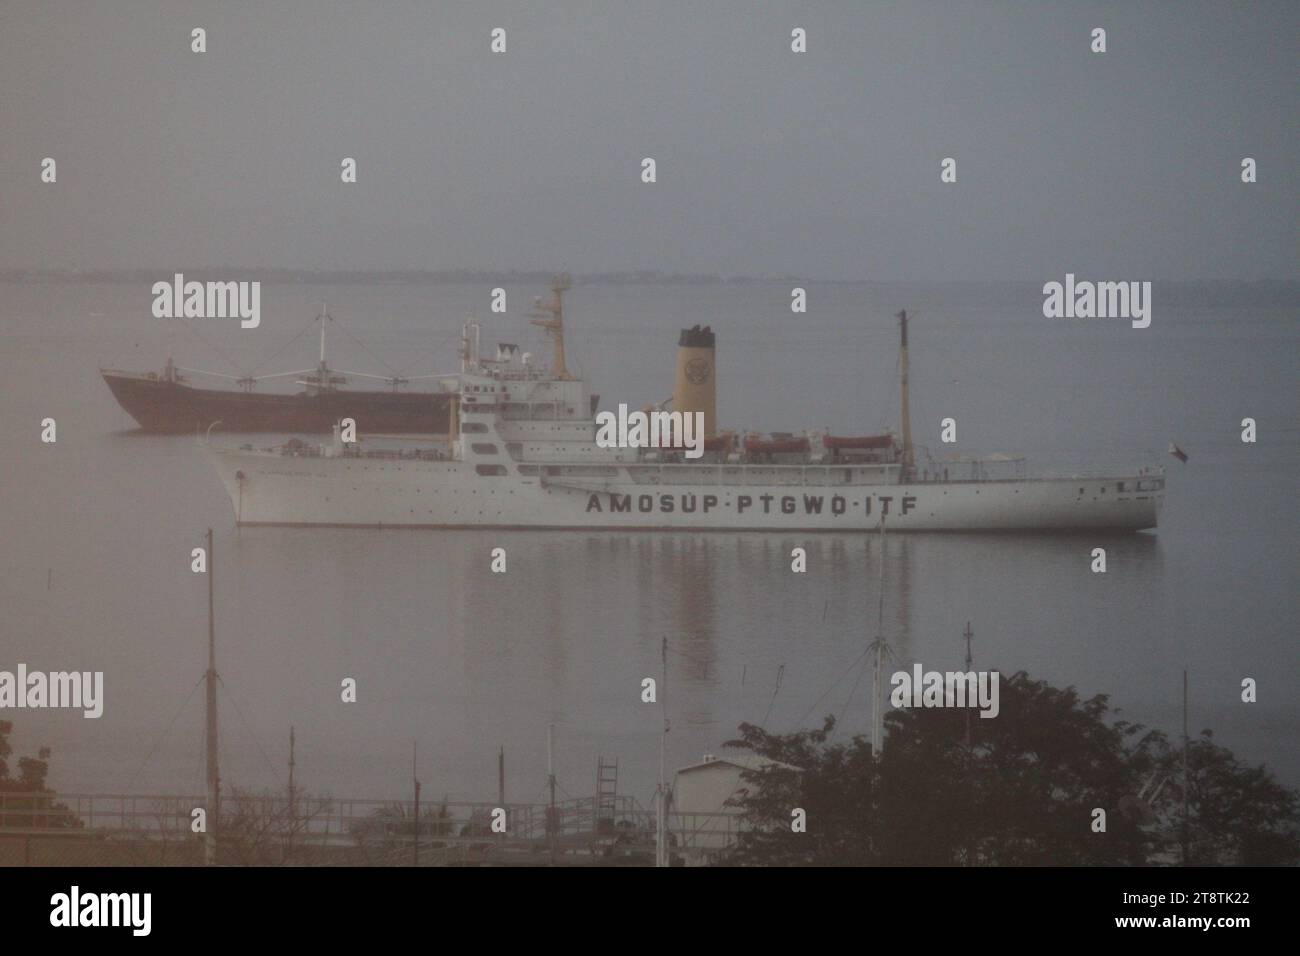 AMOSUP-PTGWO-ITF: Ship Belonging to the Associated Marine Officers and ...